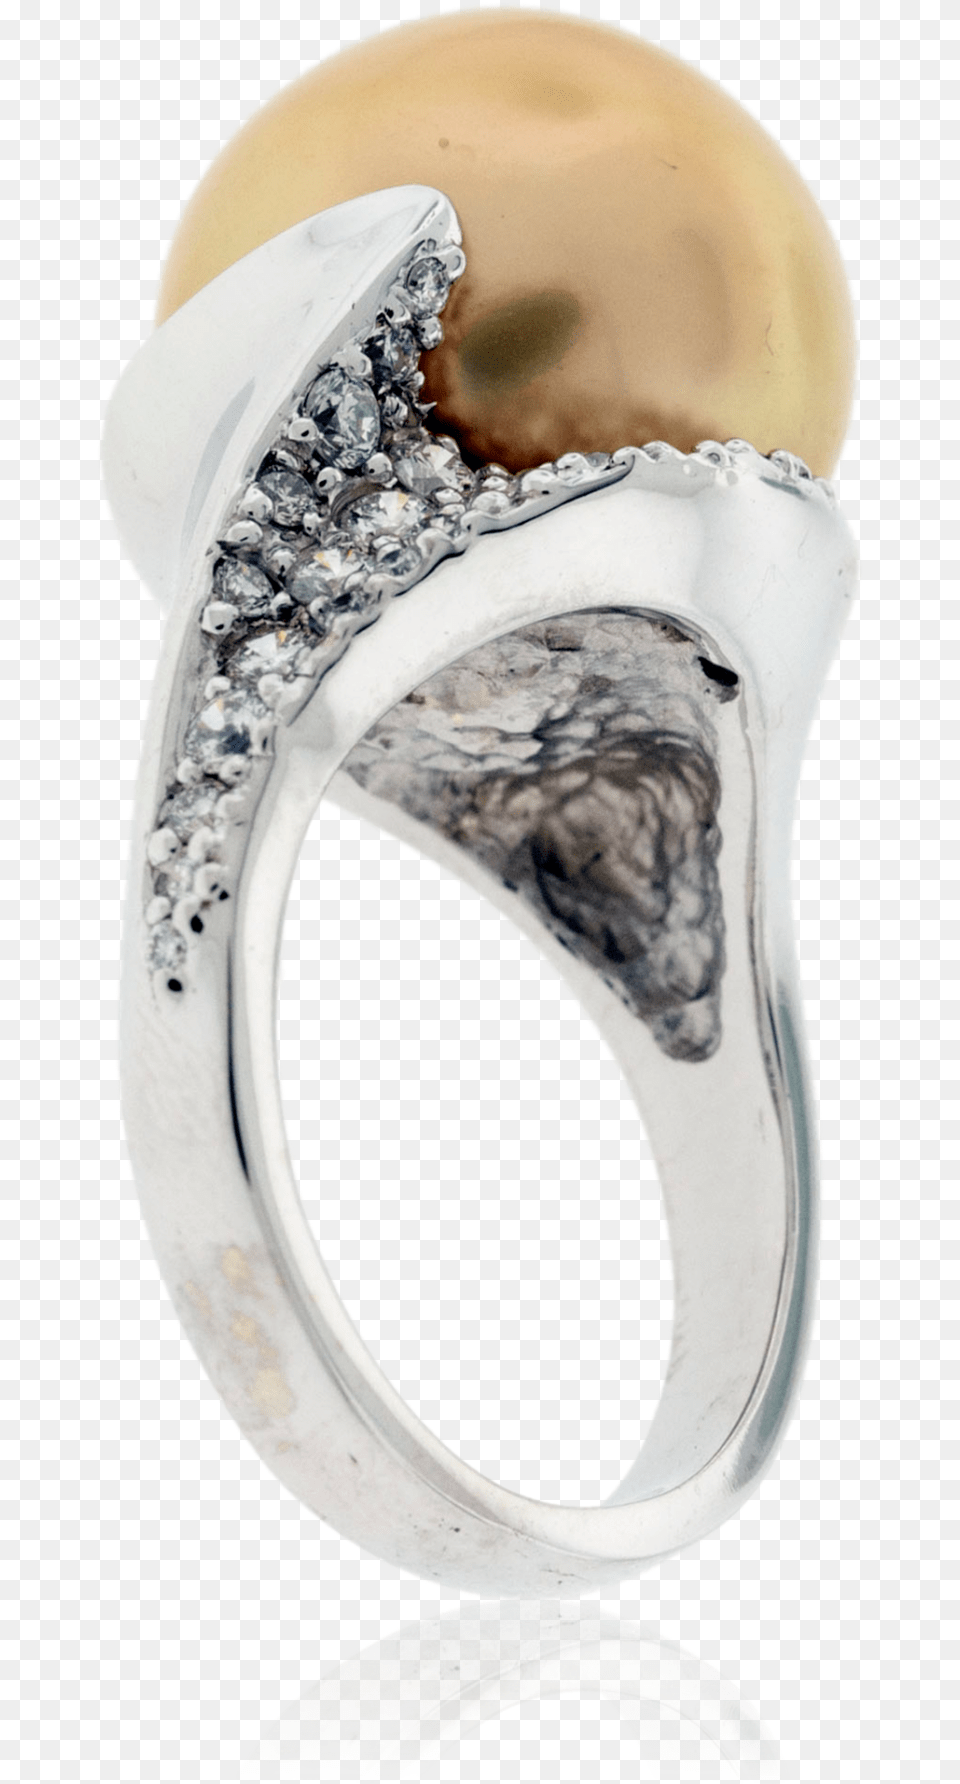 Golden Pearl And Diamond Swirl Ring Pre Engagement Ring, Accessories, Jewelry, Gemstone Png